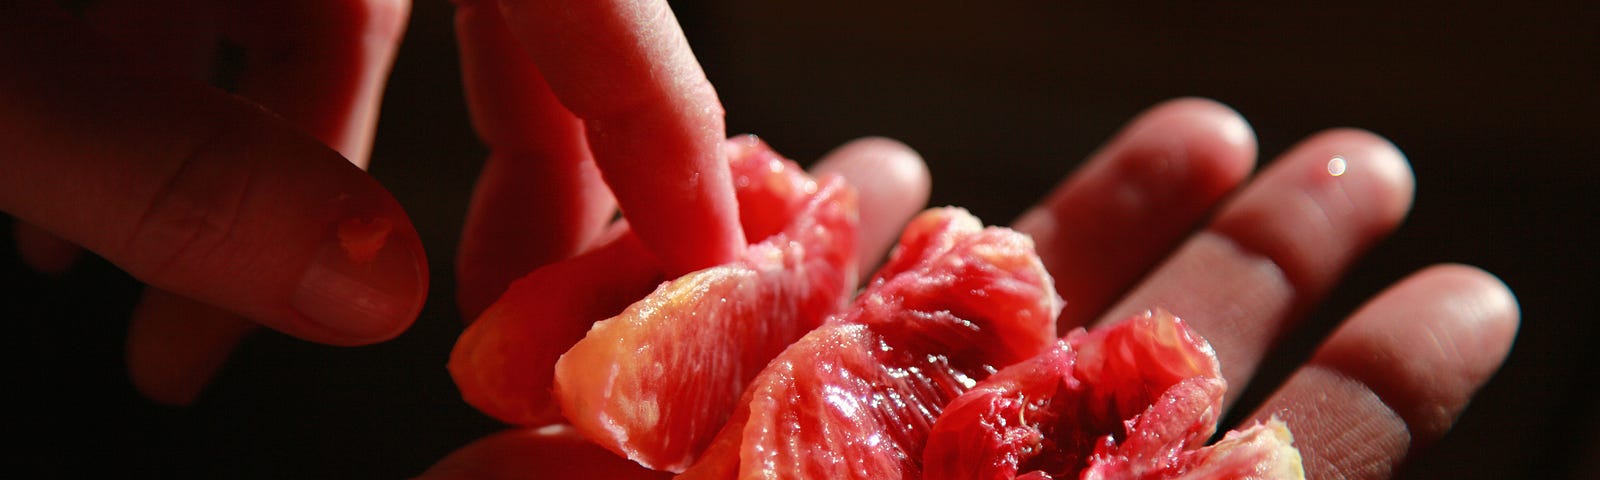 A blood orange, peeled and sectioned, juicy in the palm of a hand.